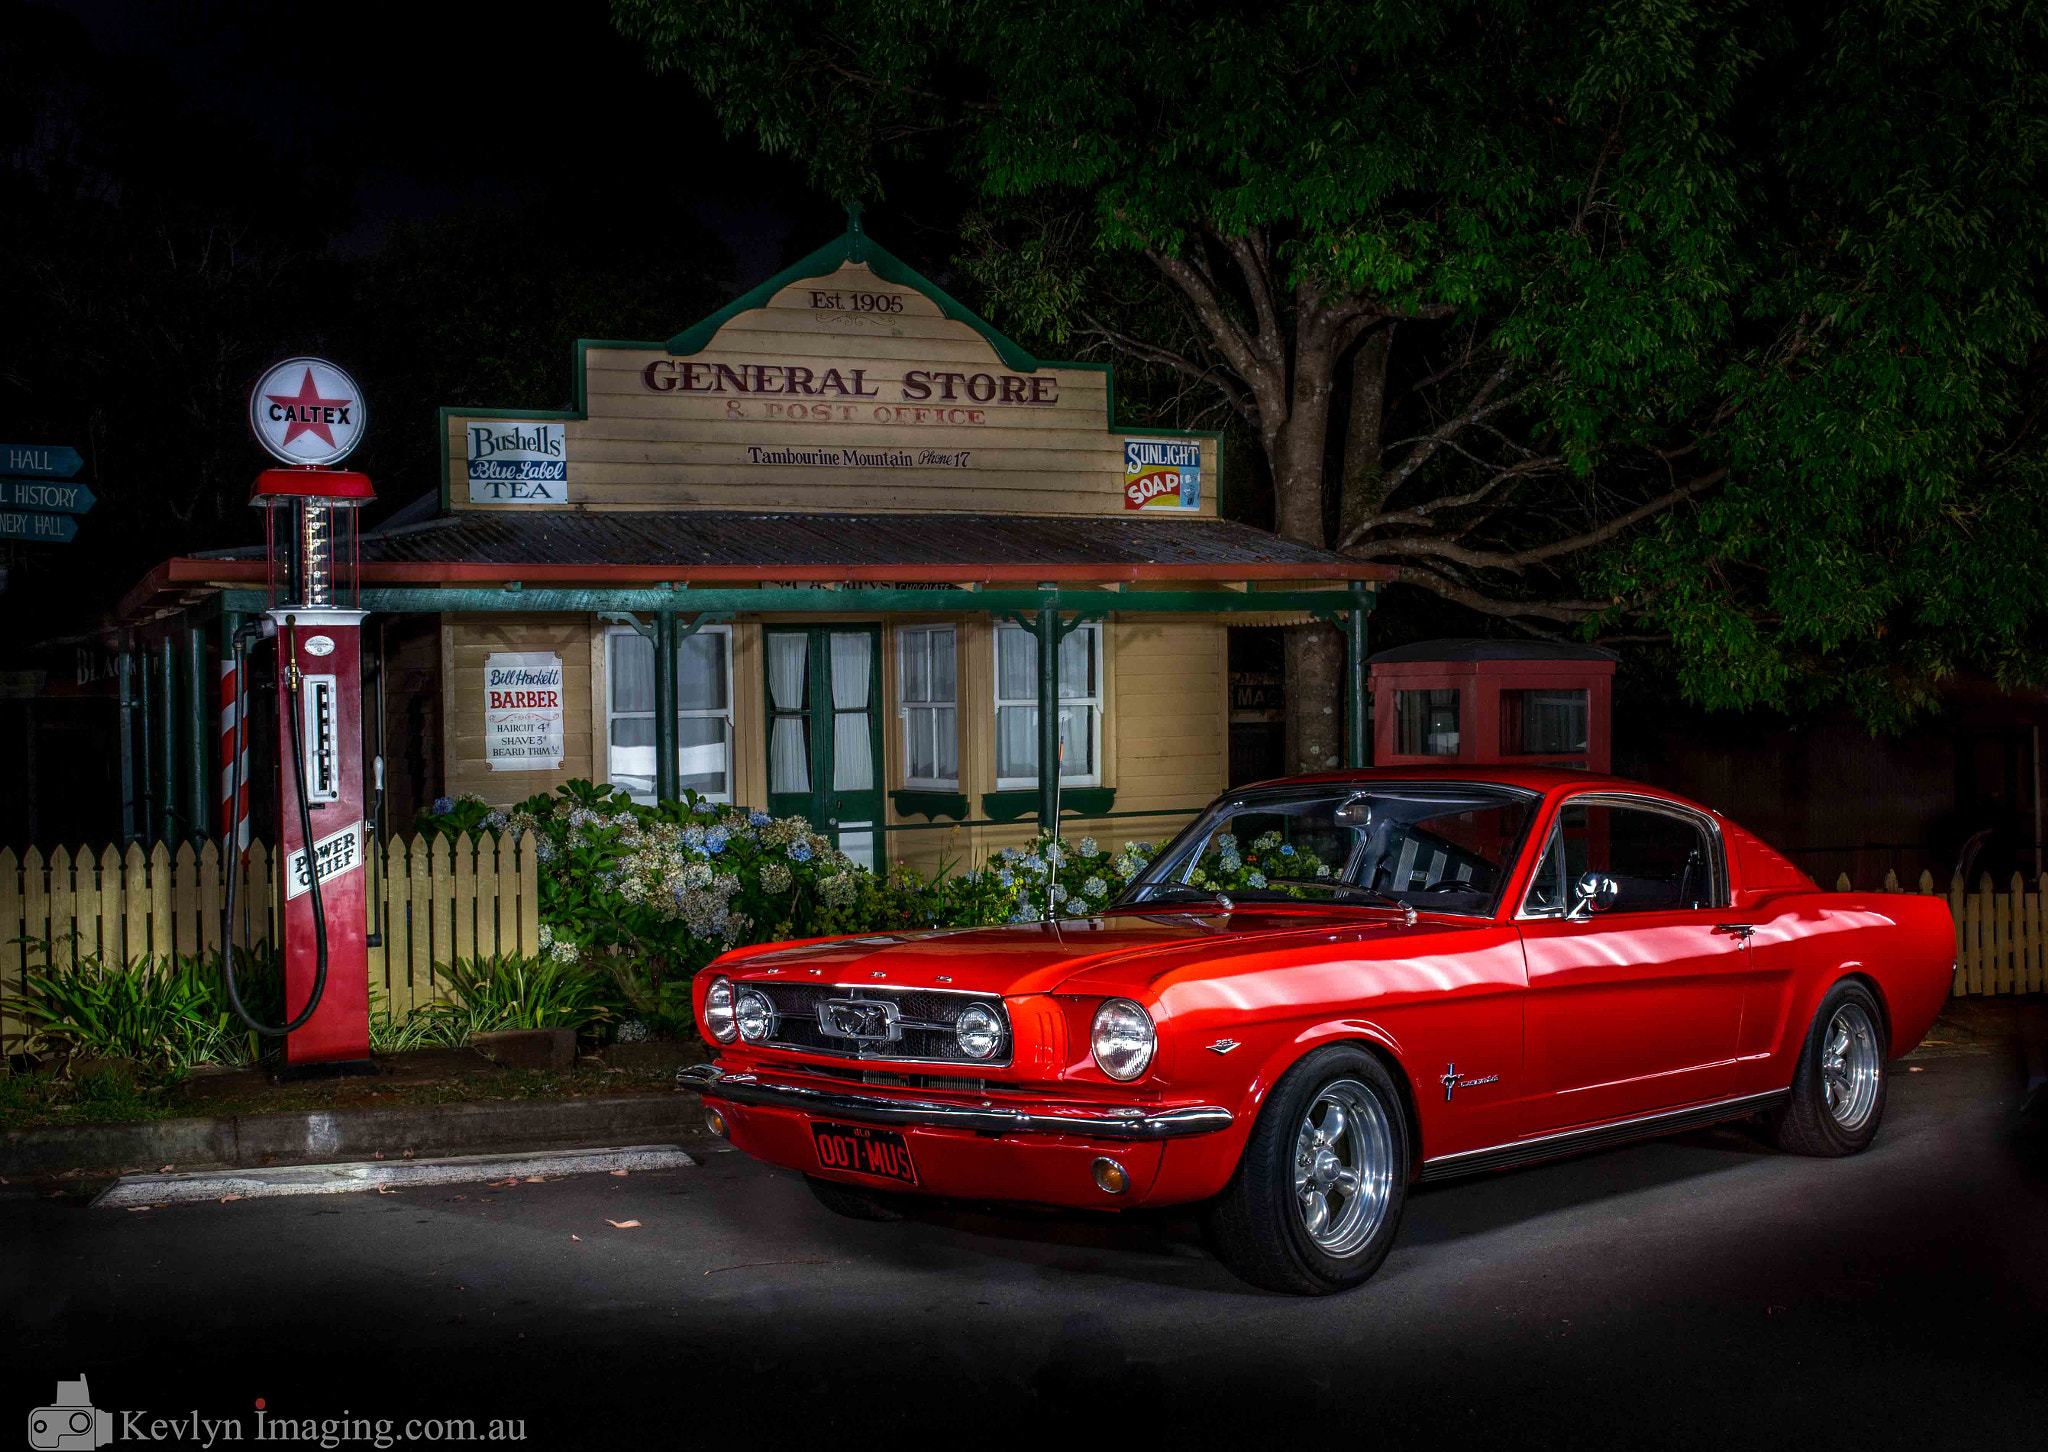 Sony a7 II + Sigma 35mm F1.4 DG HSM Art sample photo. Mustang light painting photography